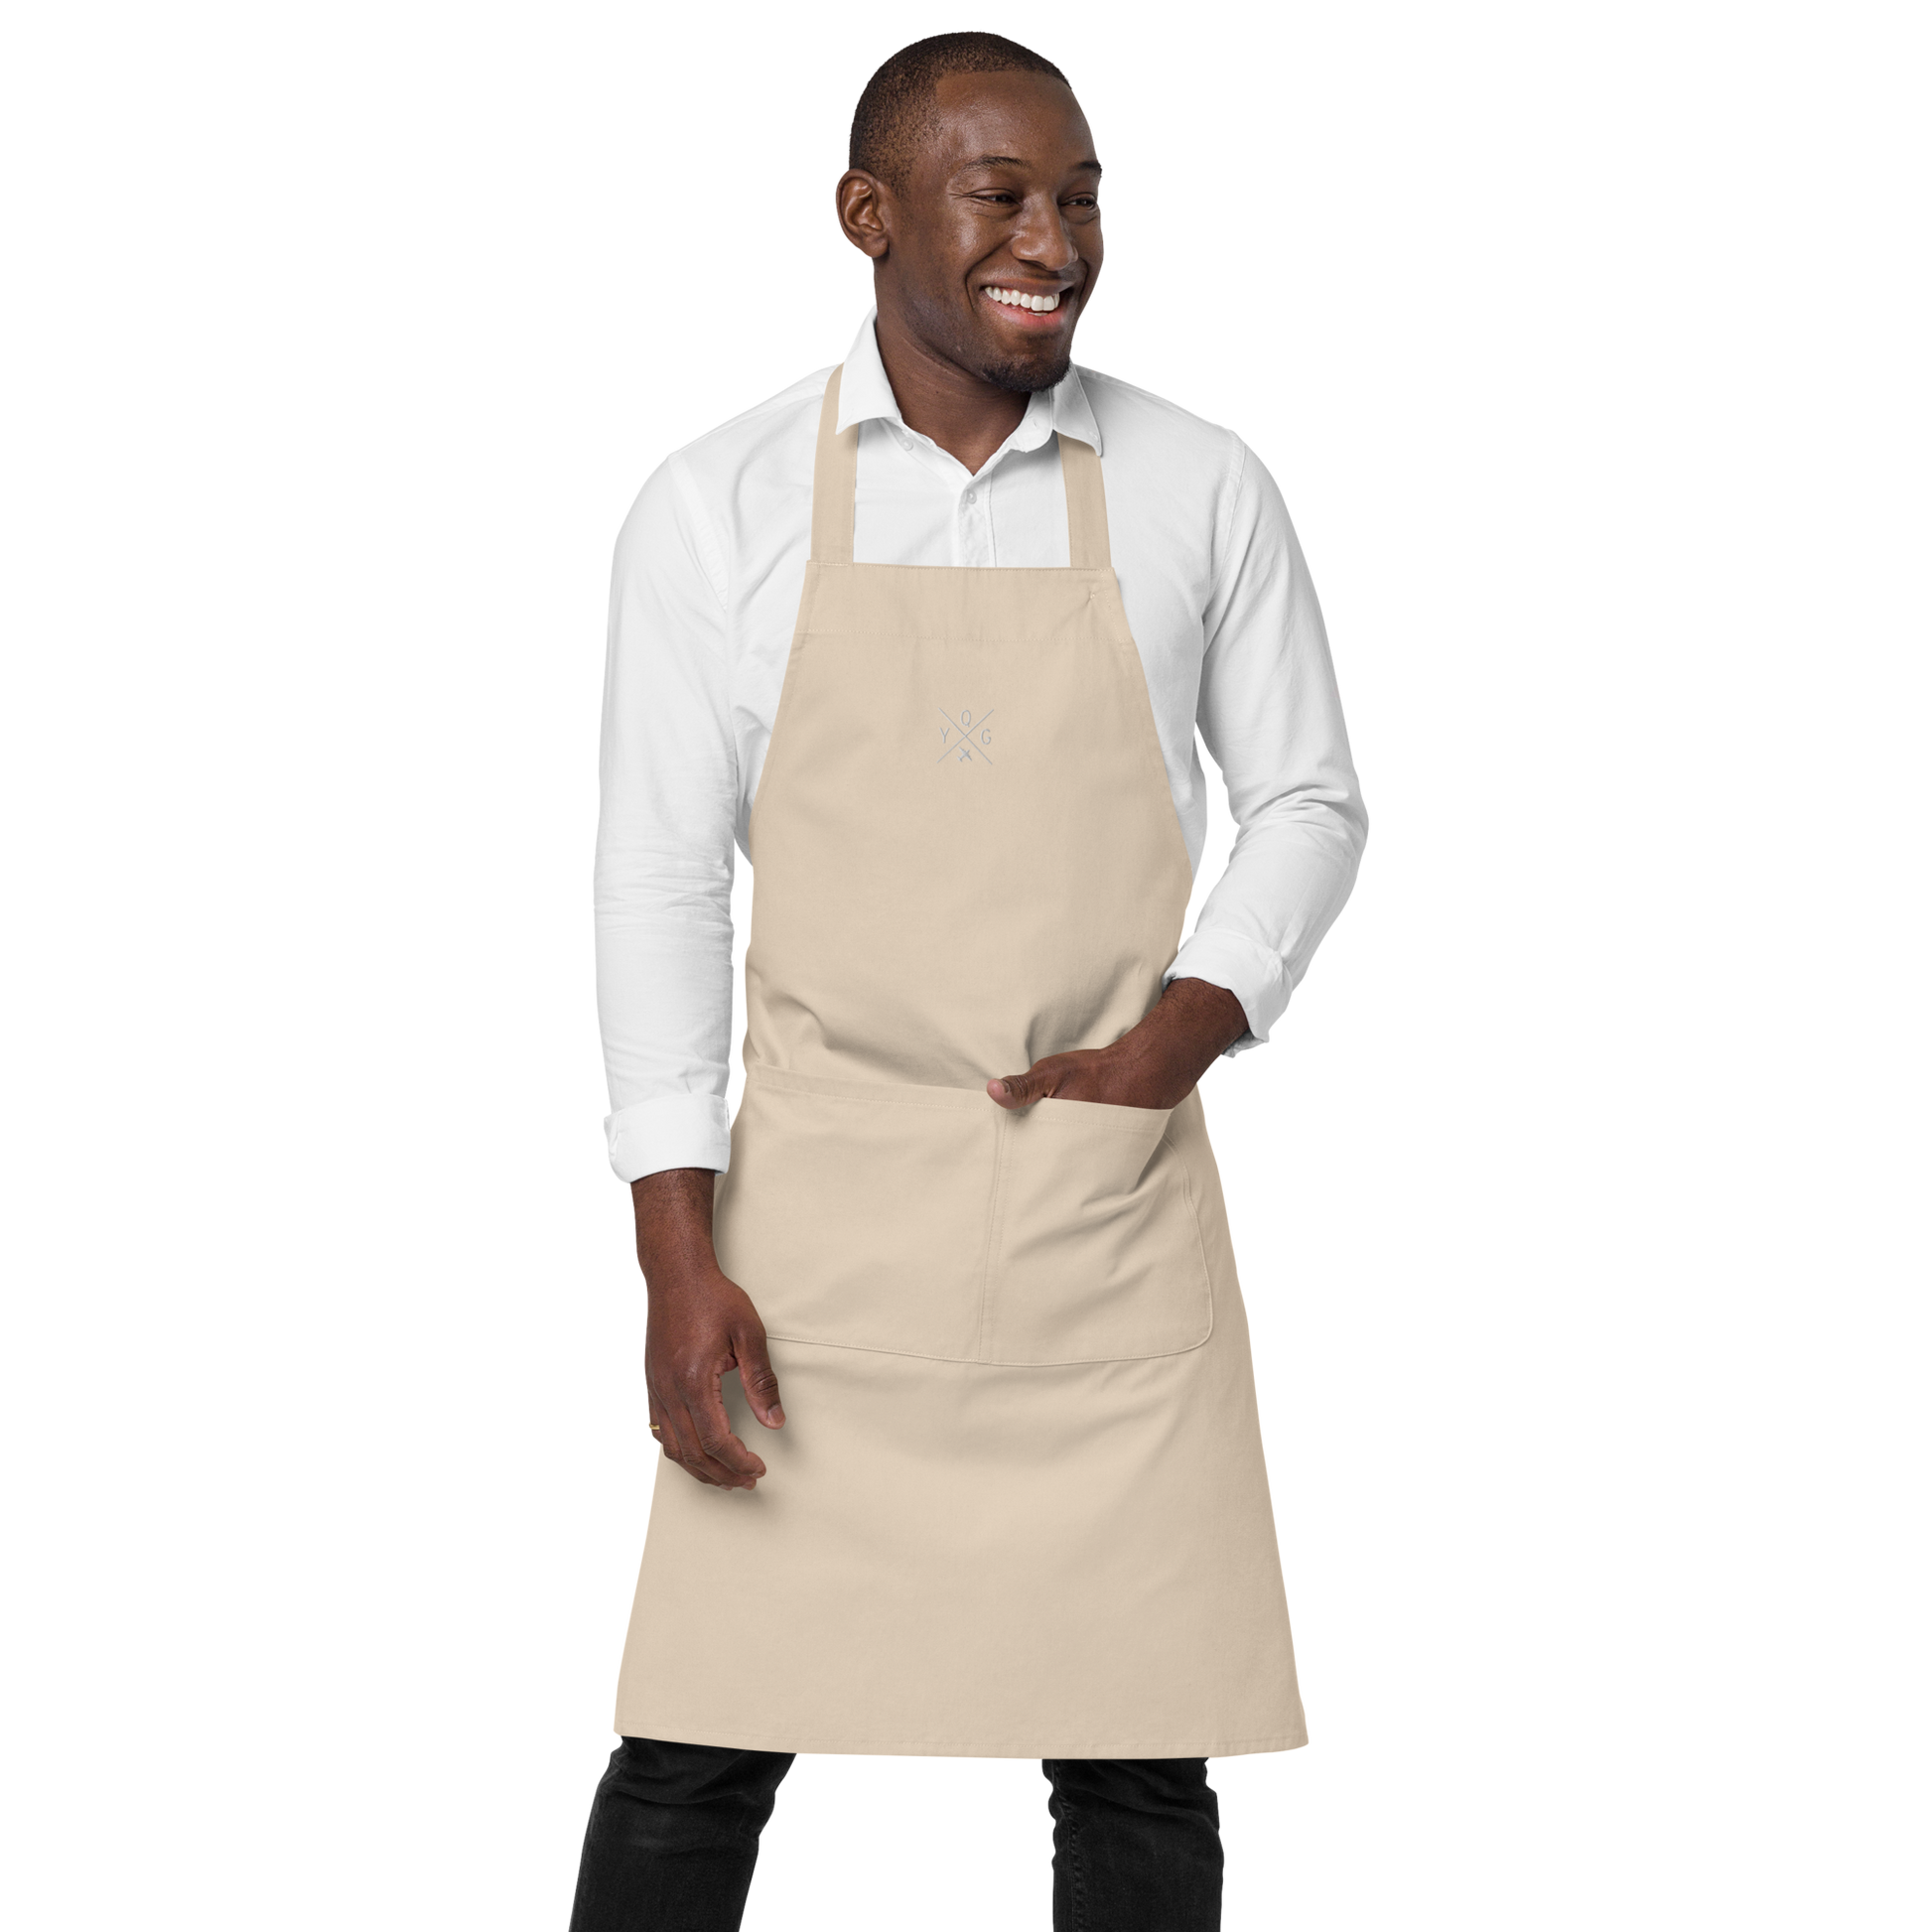 YHM Designs - YQG Windsor Organic Cotton Apron - Crossed-X Design with Airport Code and Vintage Propliner - White Embroidery - Image 14